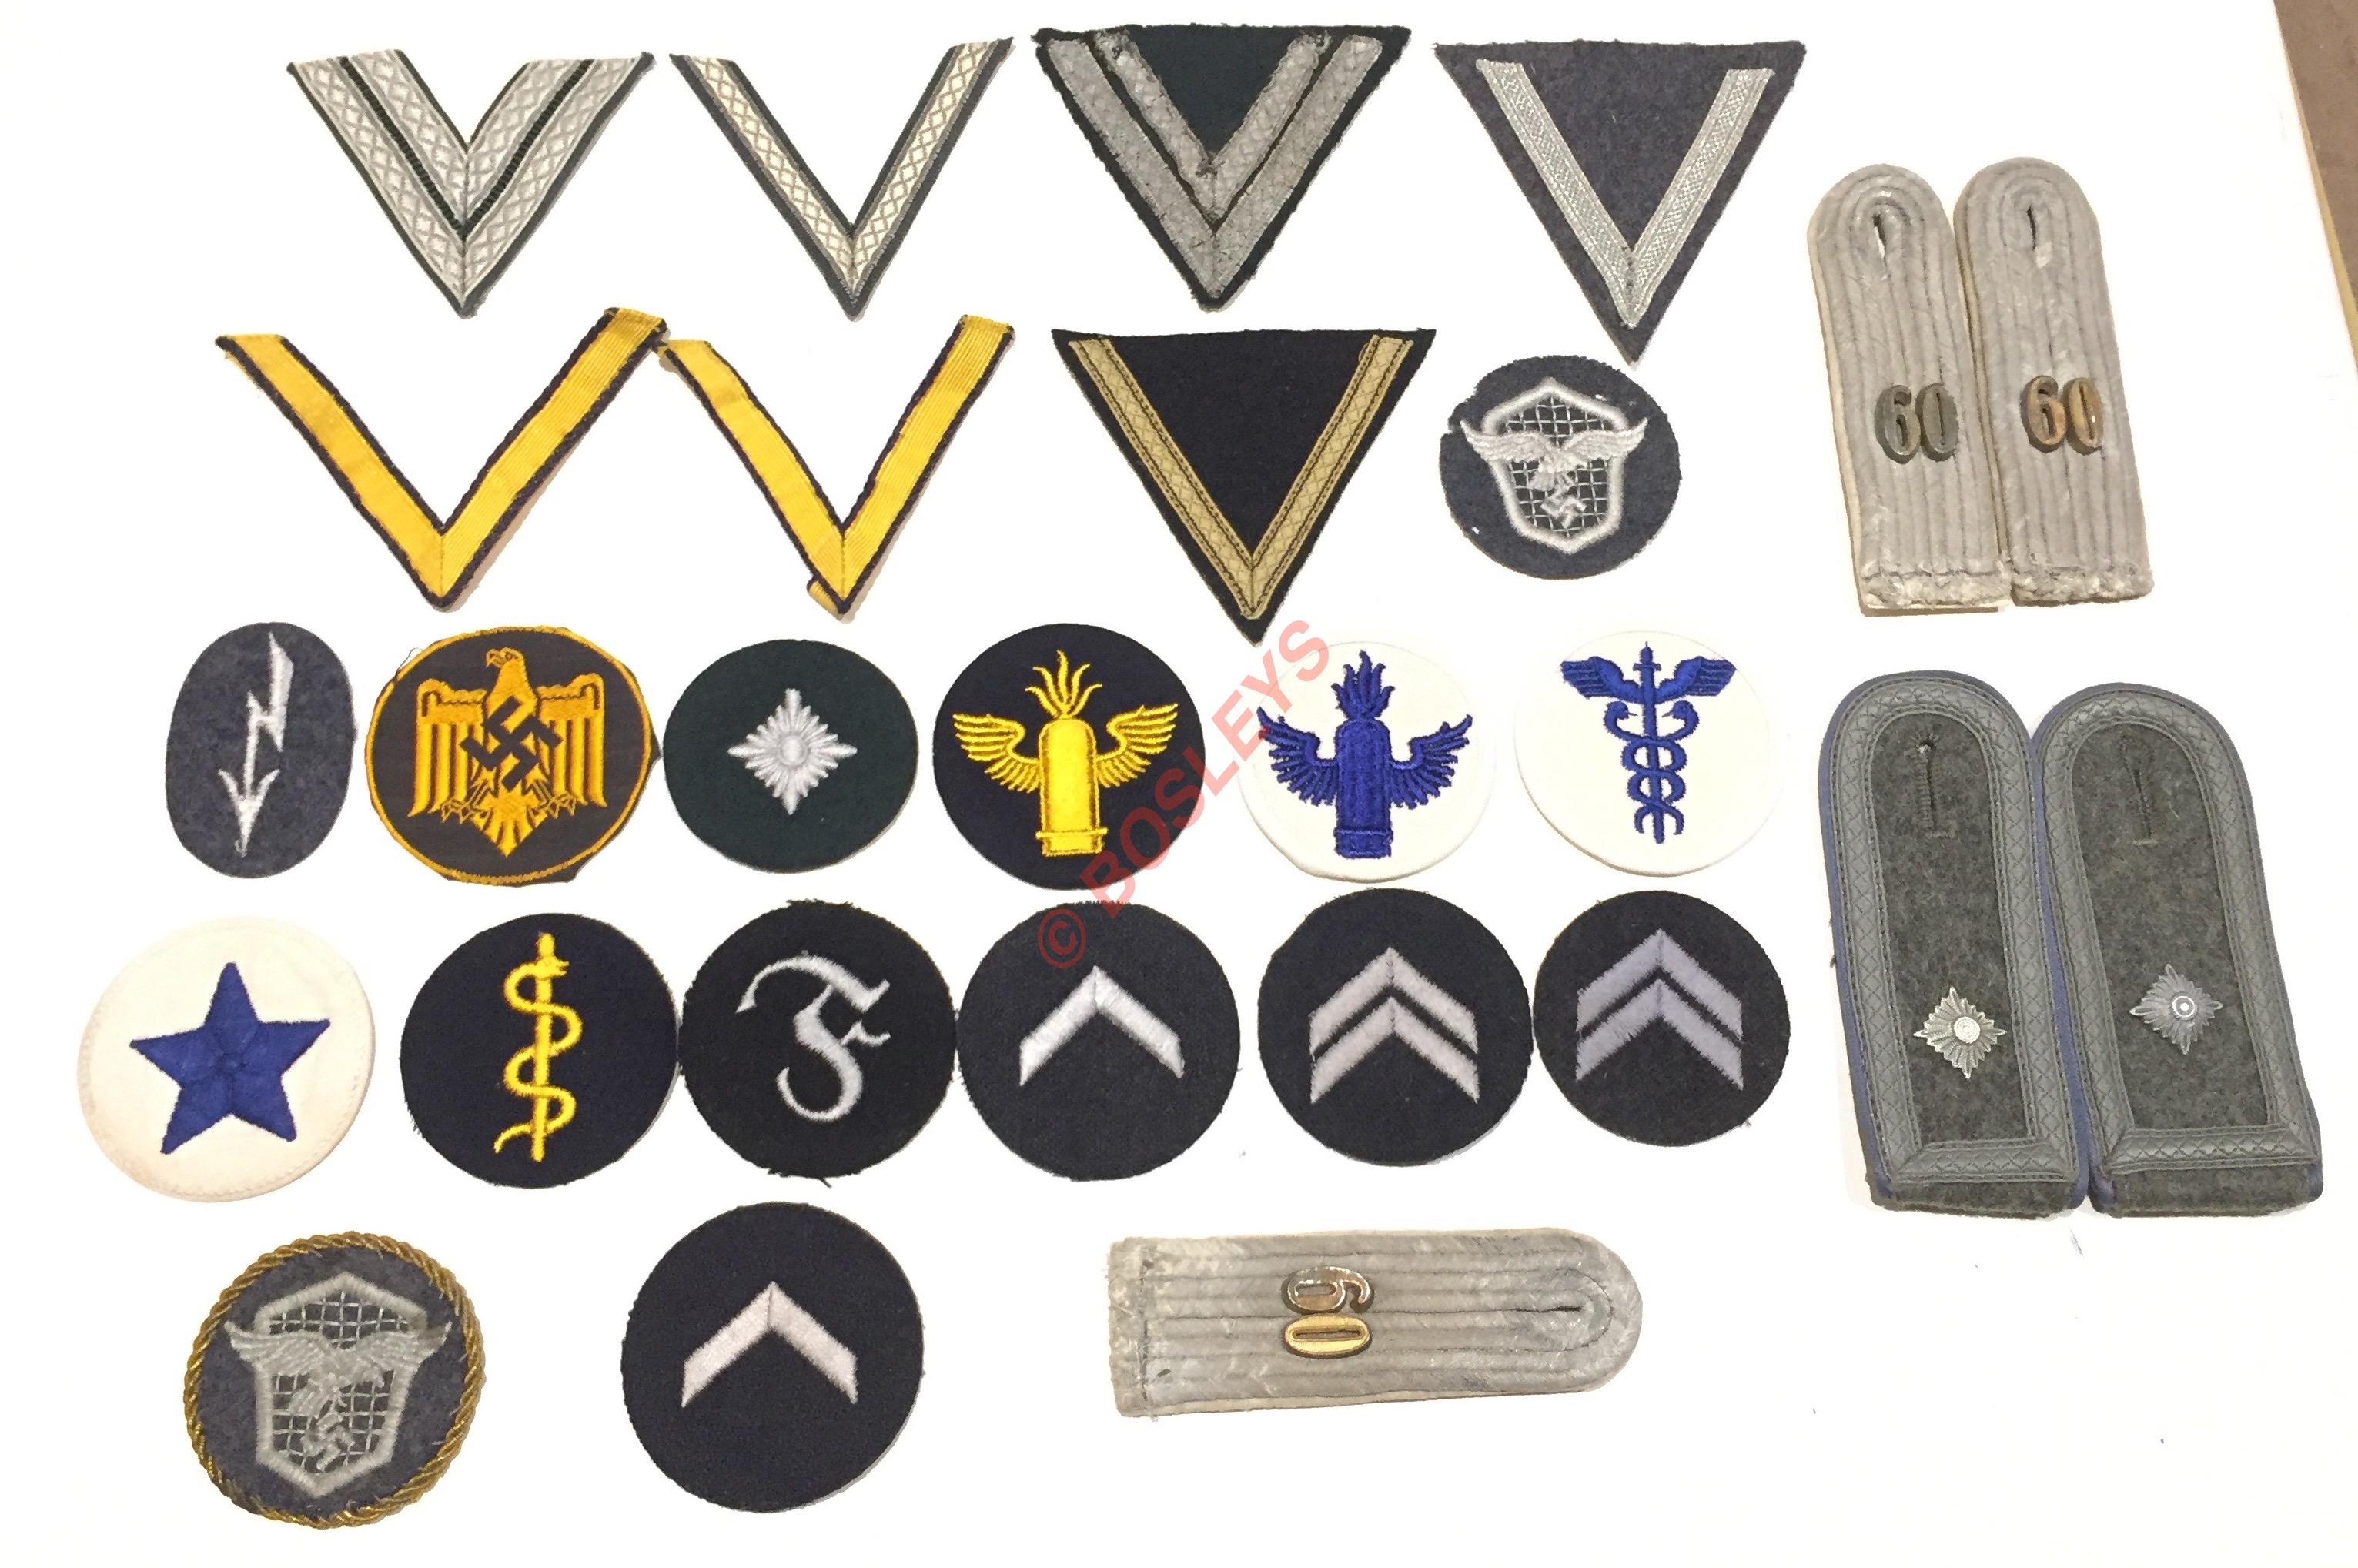 German Third Reich various cloth insignia.7 assorted Wehrmacht chevrons ... 14 assorted arm/trade